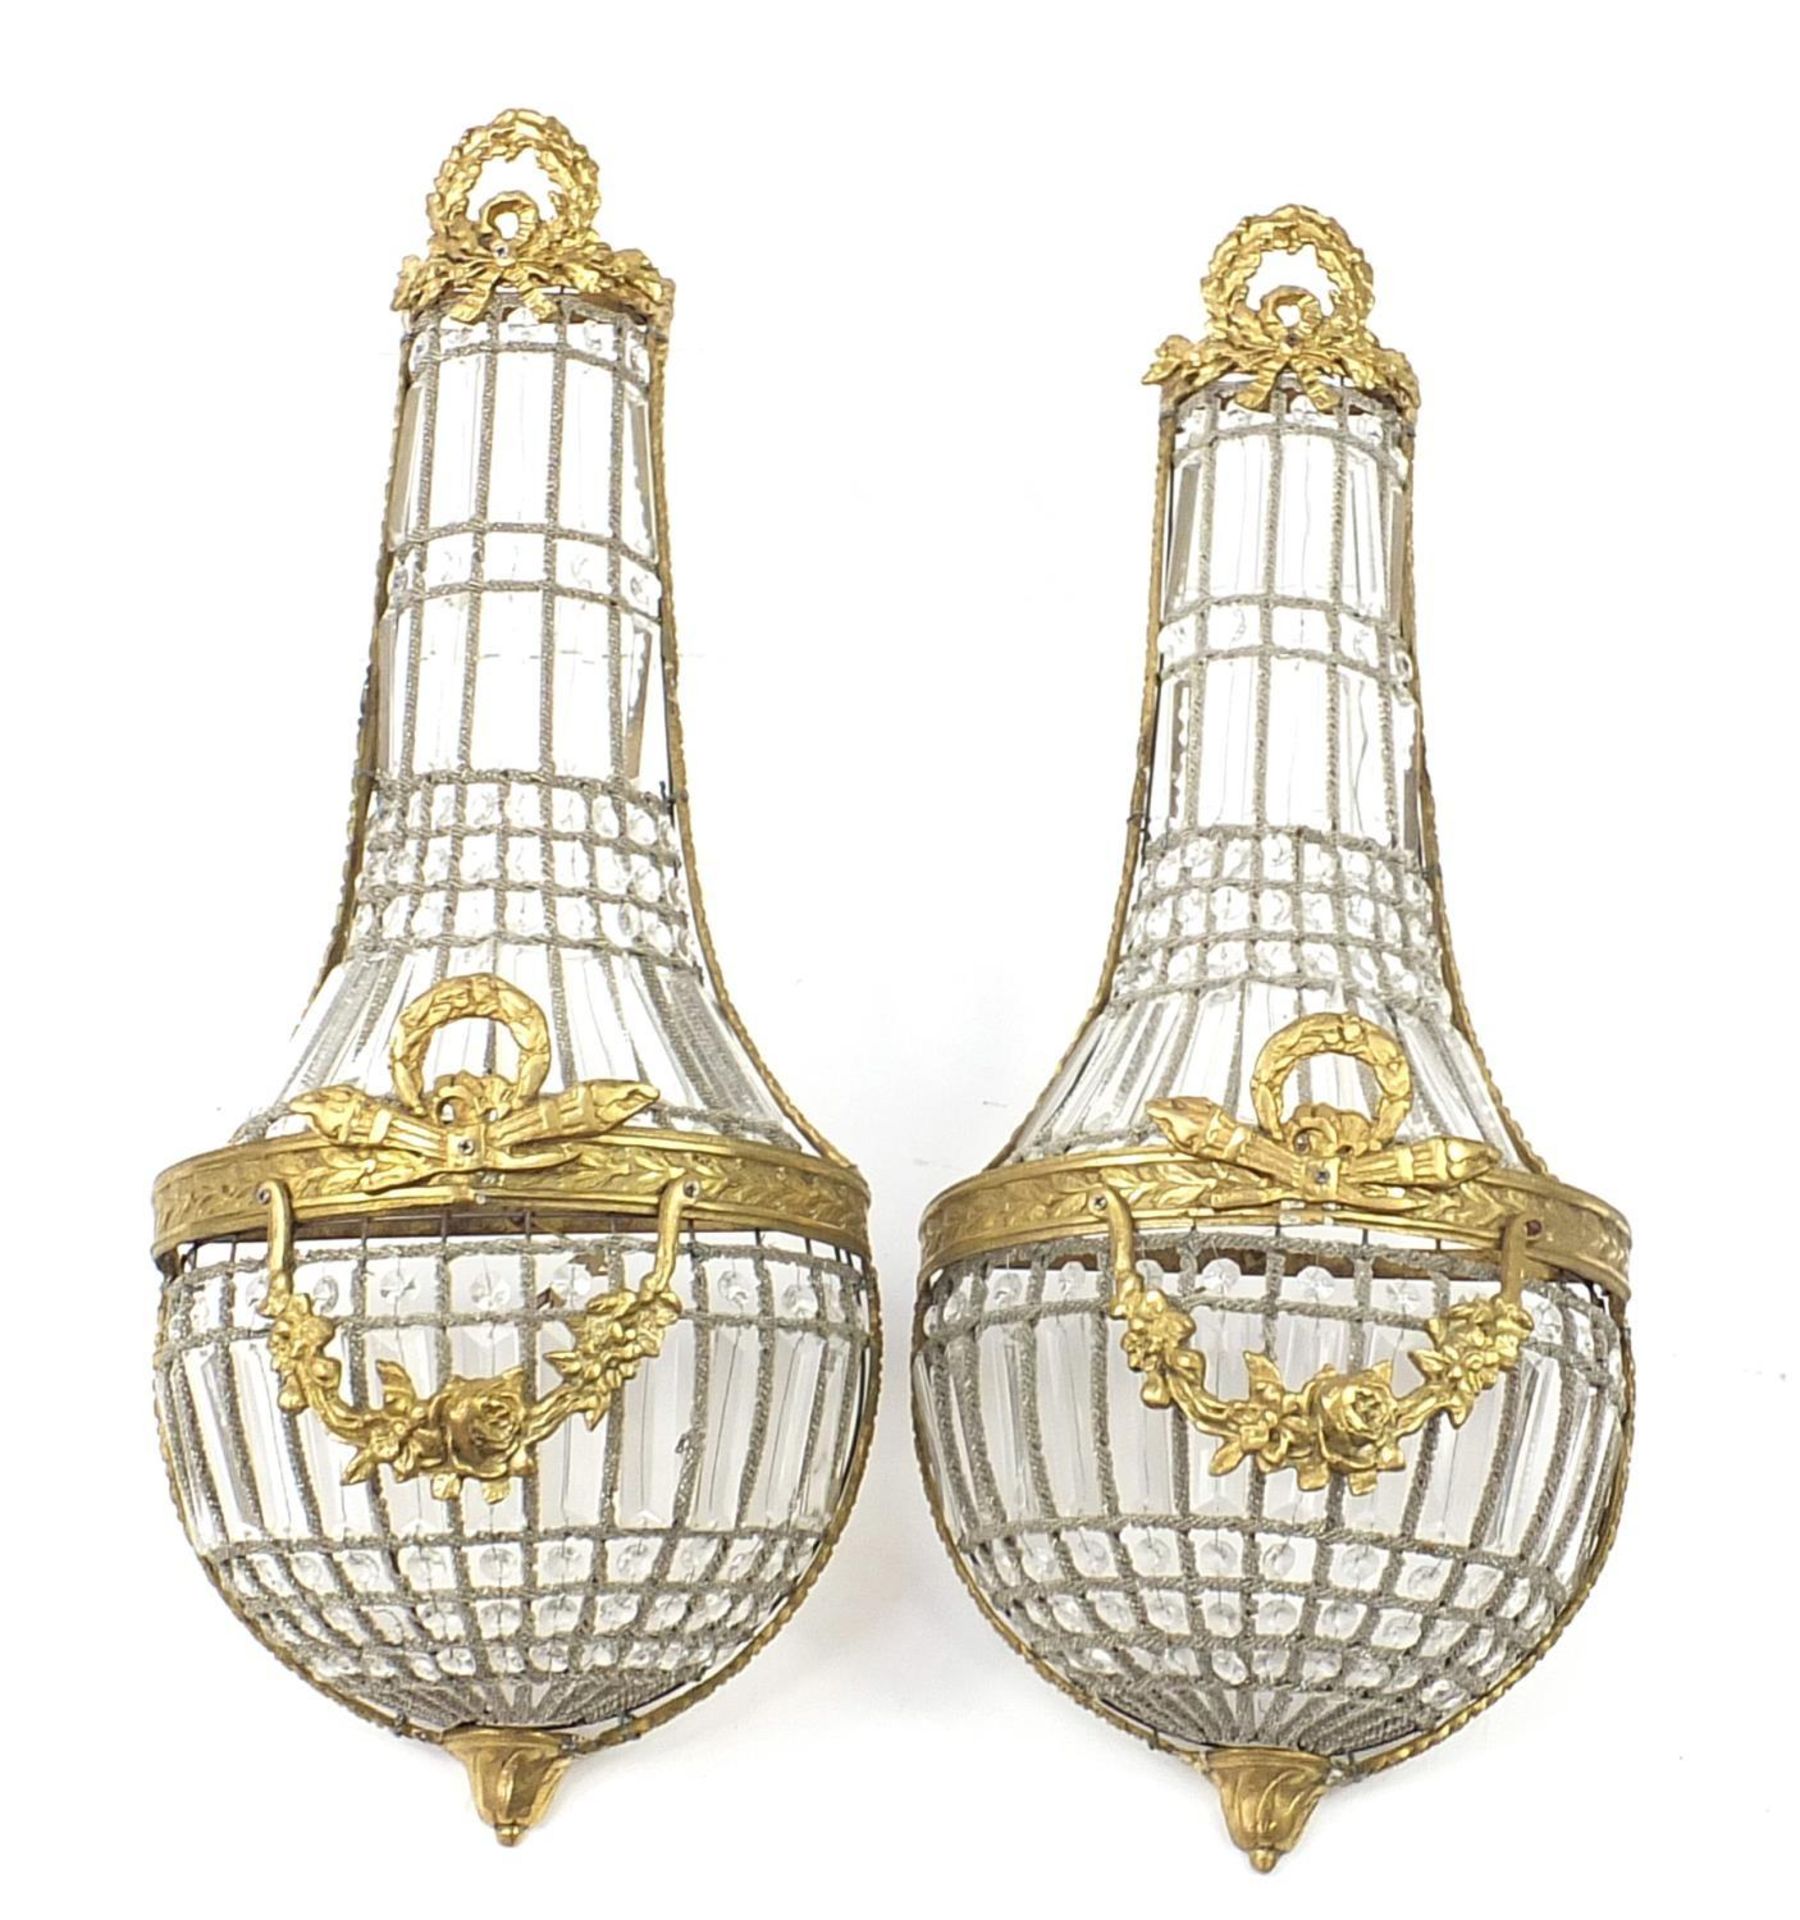 Pair of ornate gilt metal chandelier design wall sconces with bow design, each 71cm high